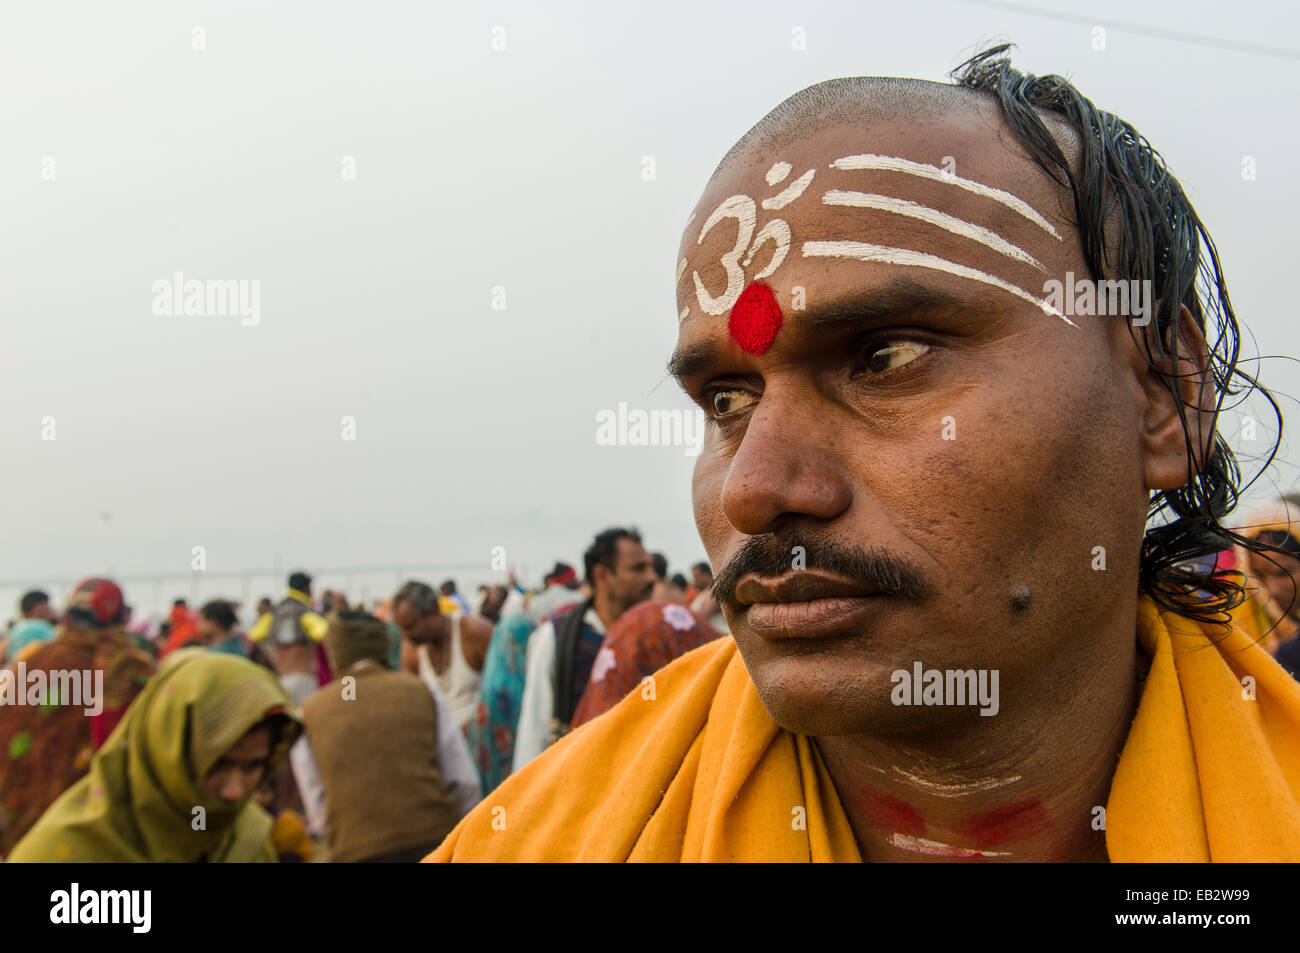 Portrait of a priest at the Sangam, the confluence of the rivers Ganges, Yamuna and Saraswati, during Kumbh Mela, Allahabad Stock Photo